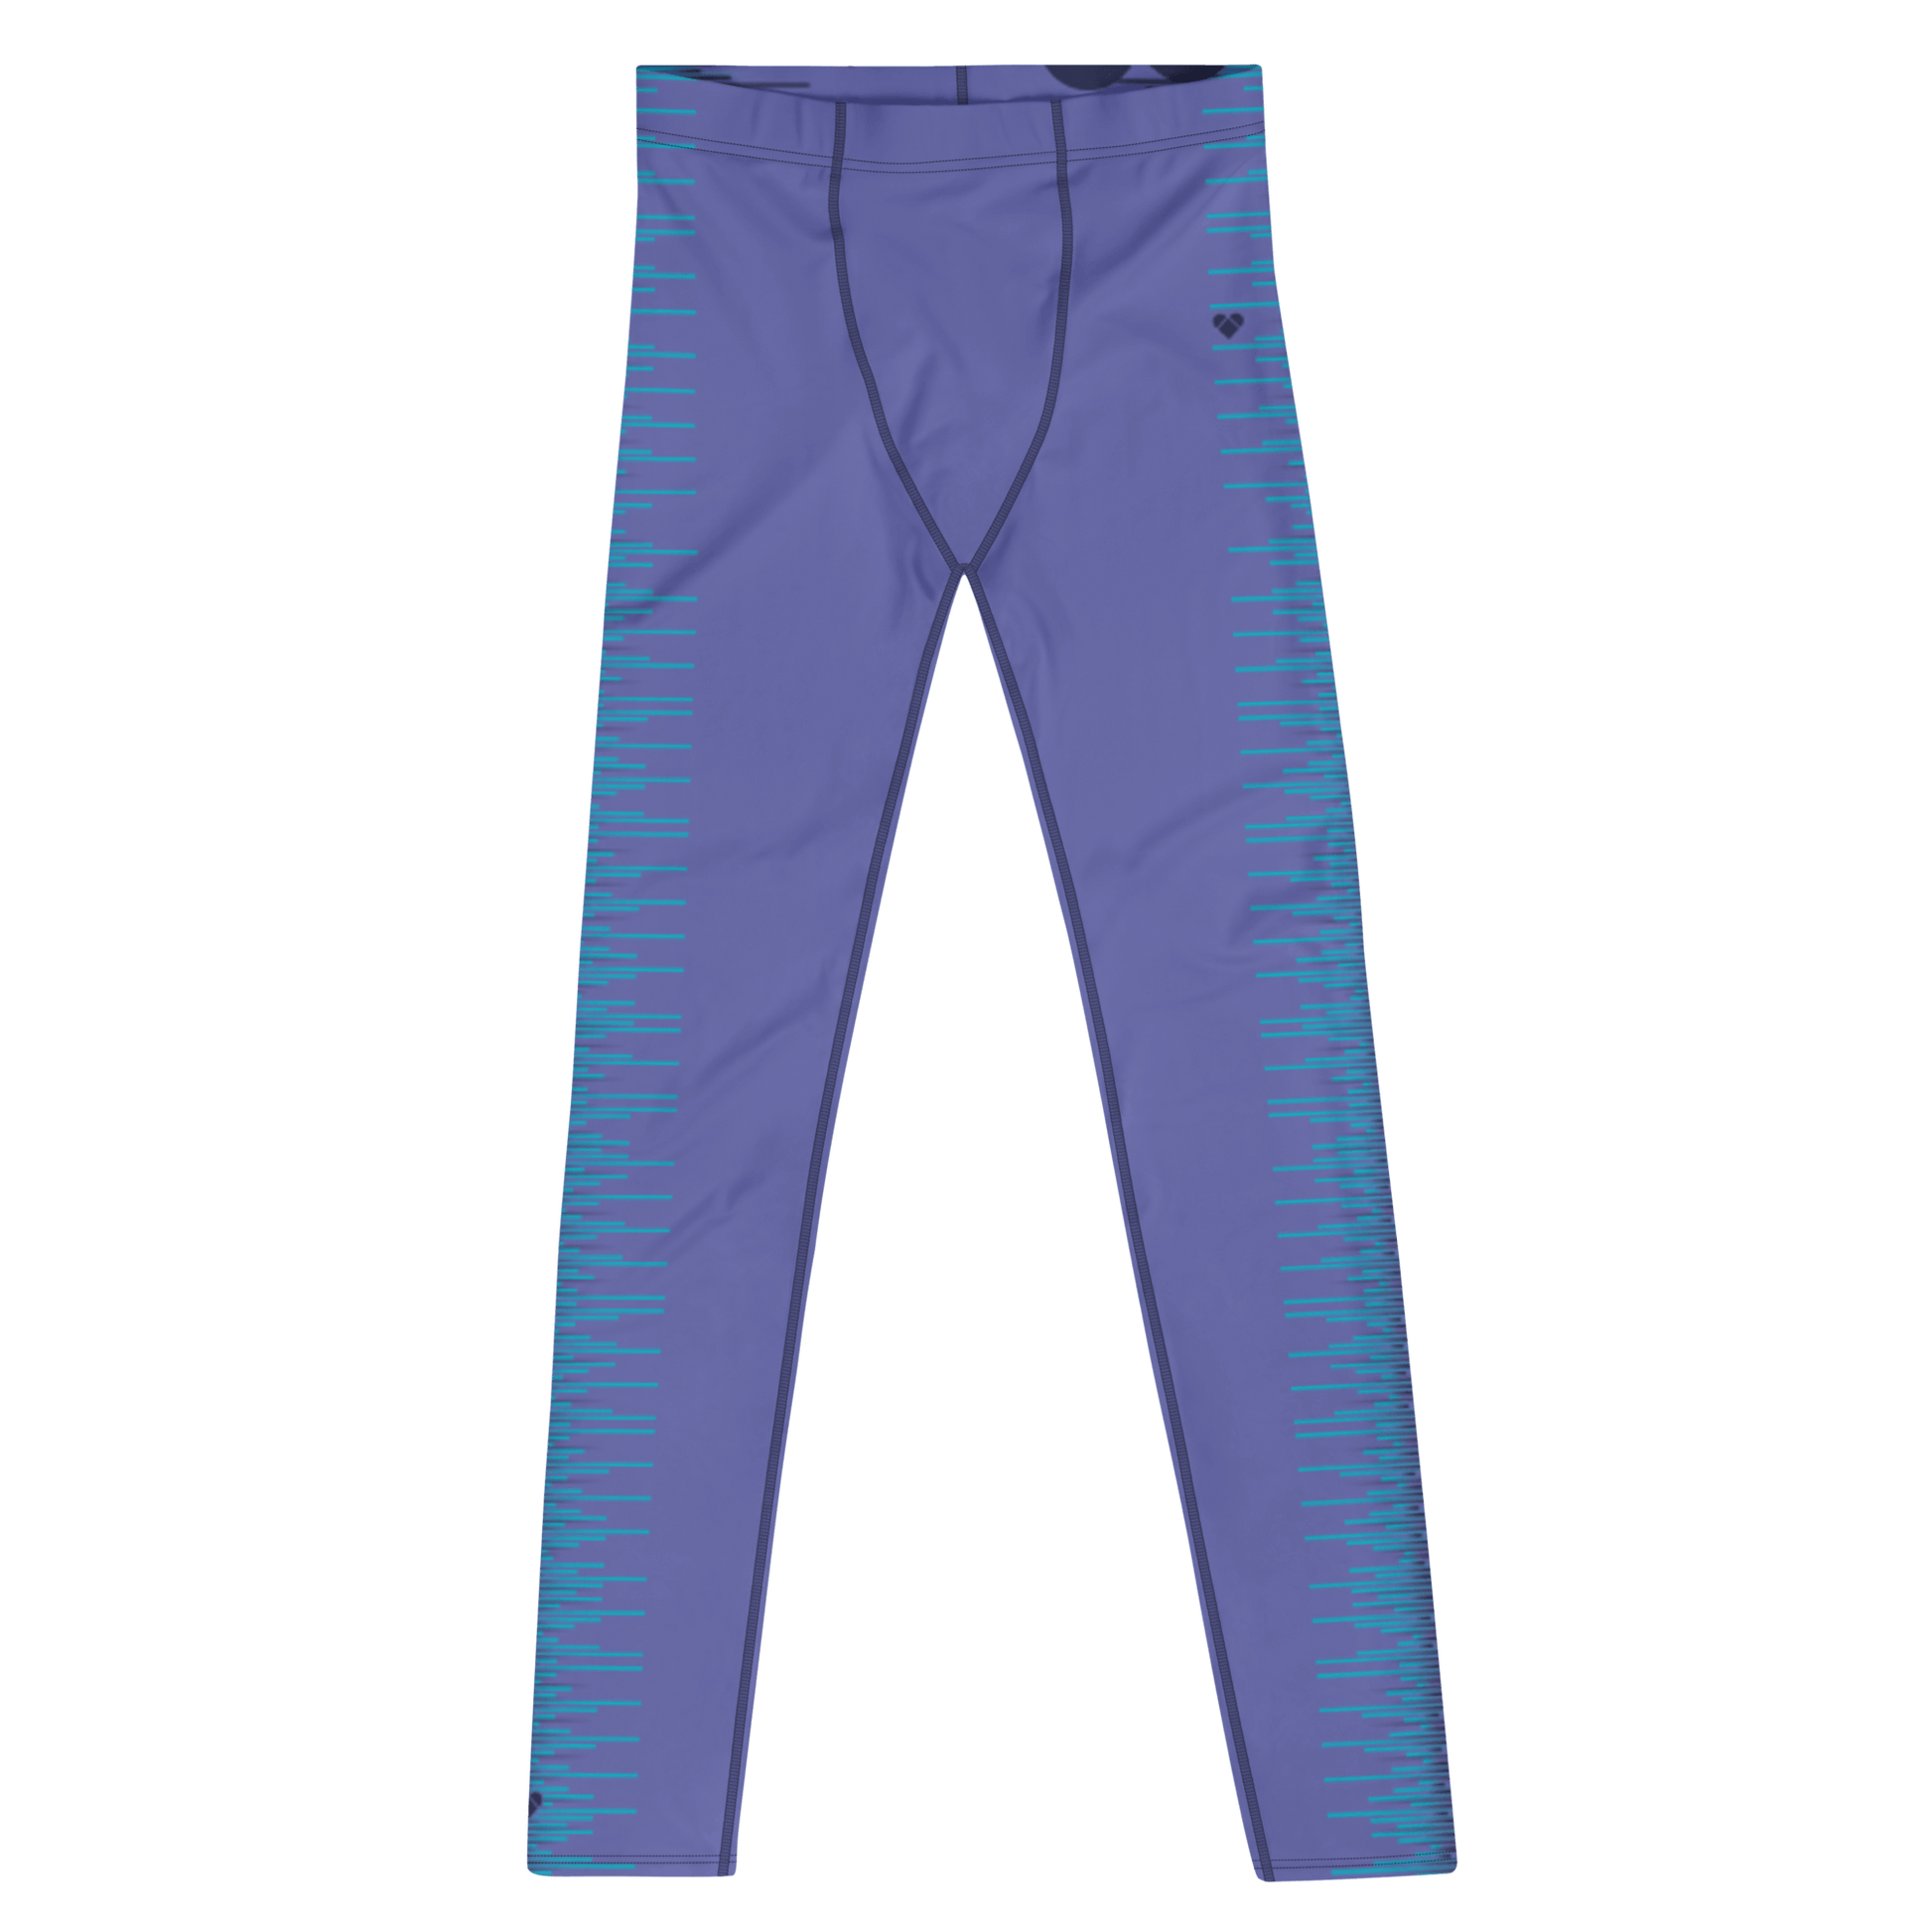 Men's designer leggings in periwinkle and turquoise from CRiZ AMOR